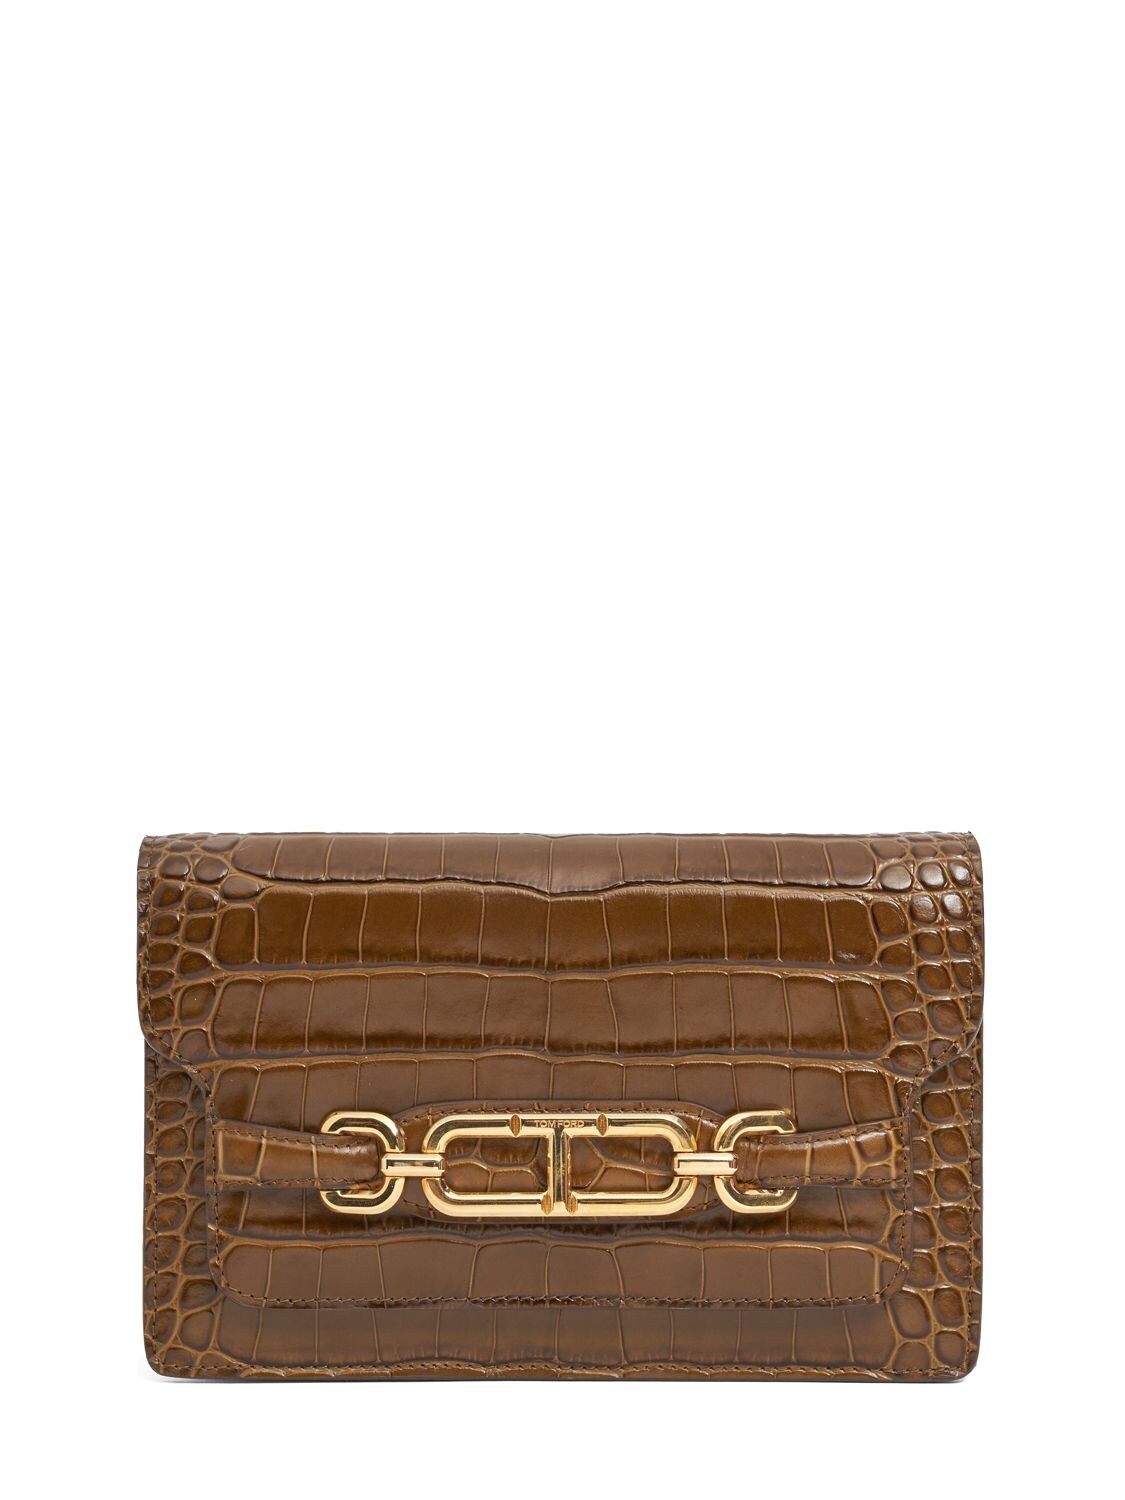 Tom Ford Small Shiny Croc Embossed Leather Bag In Khaki